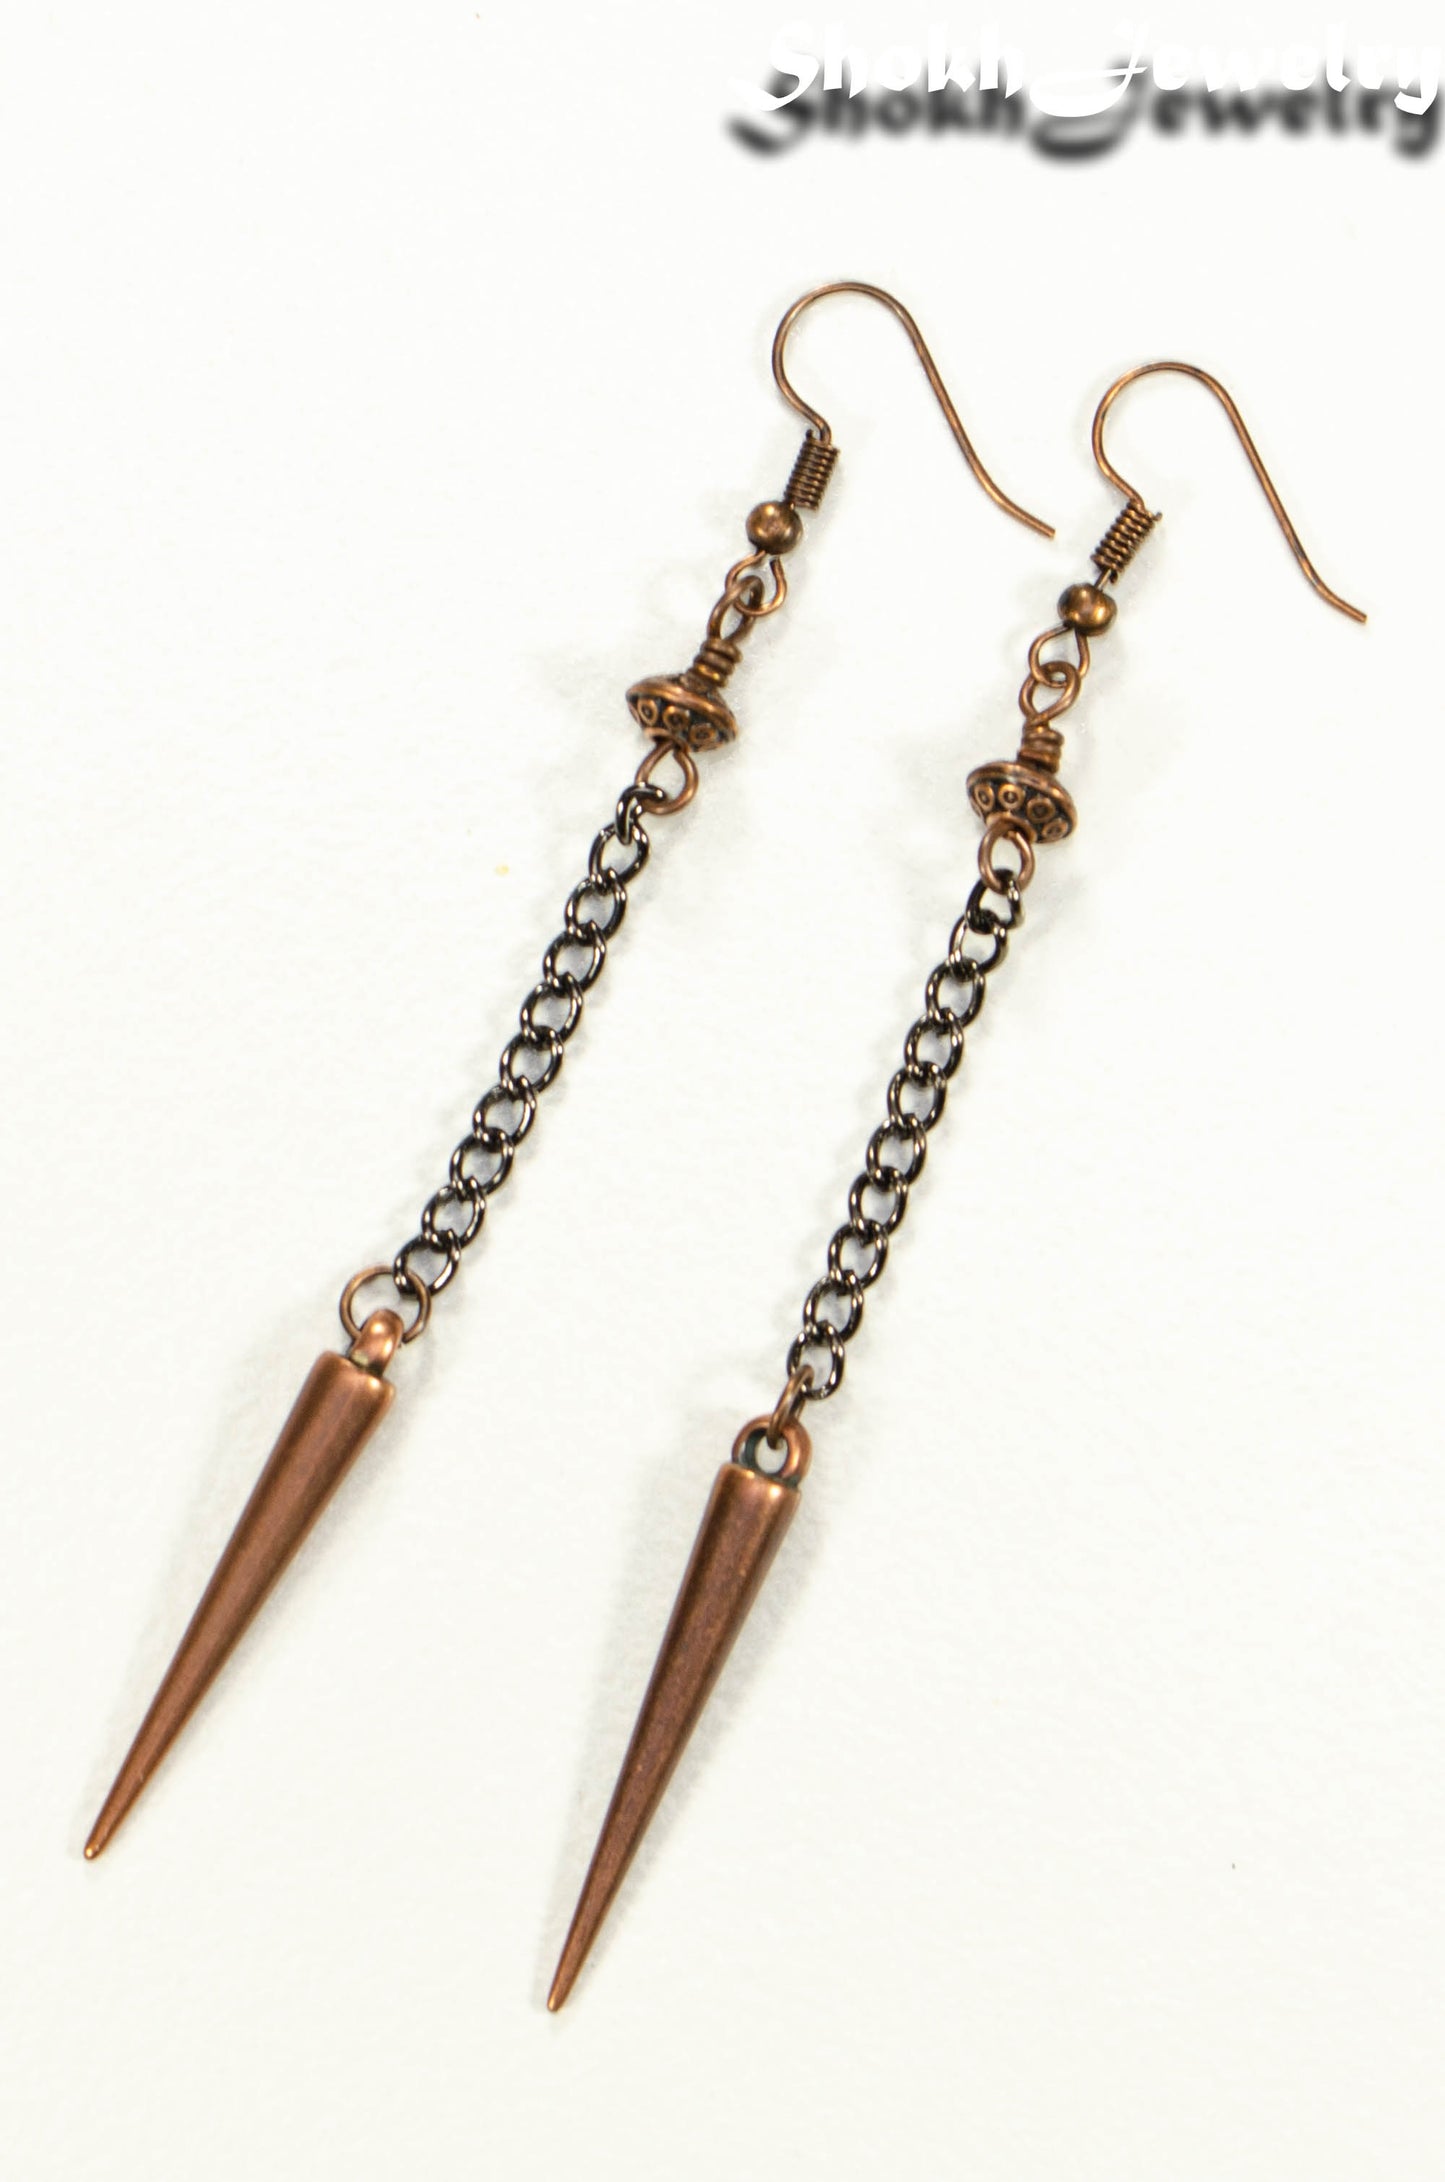 Statement chain and antique copper spike earrings